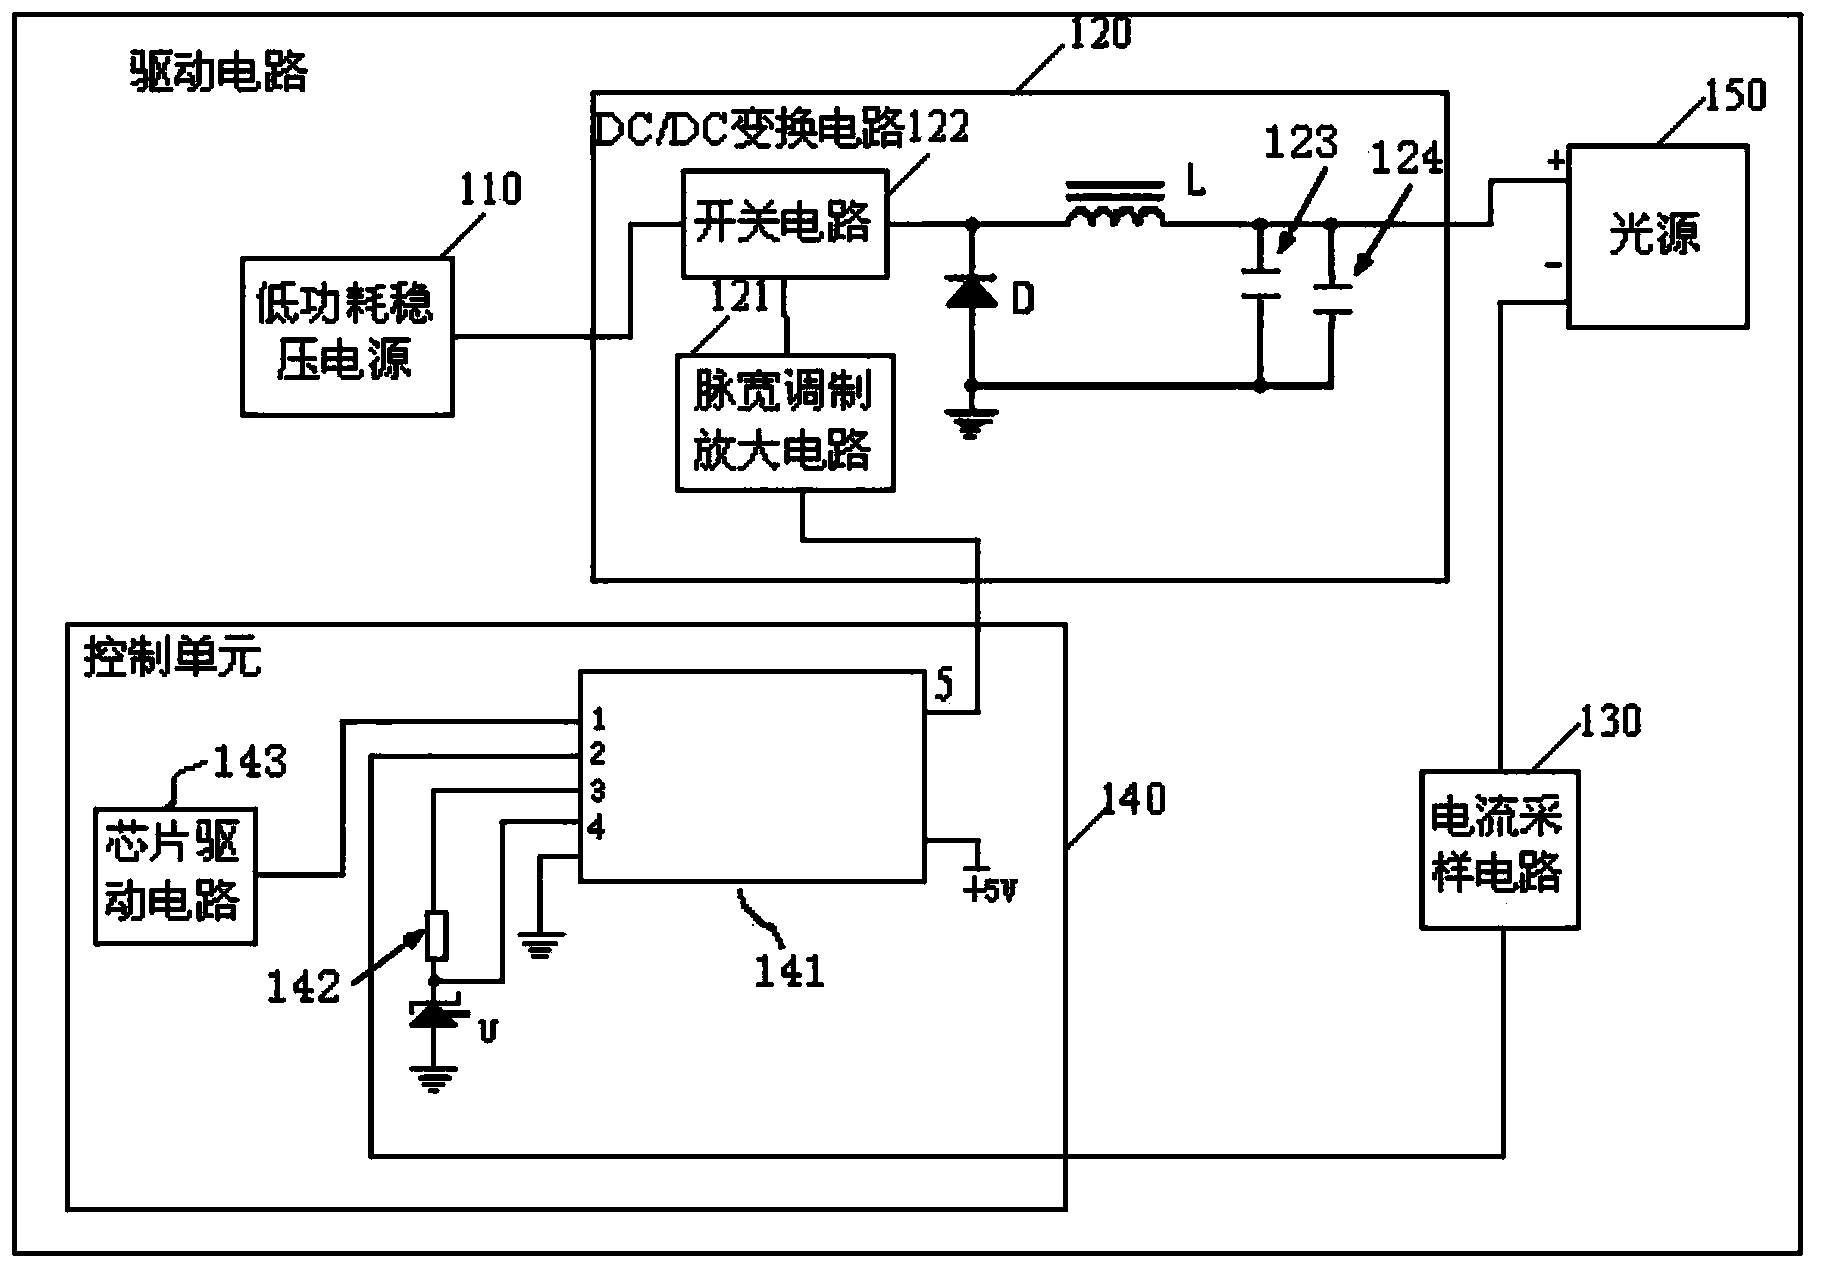 Drive circuit and lamp fixture